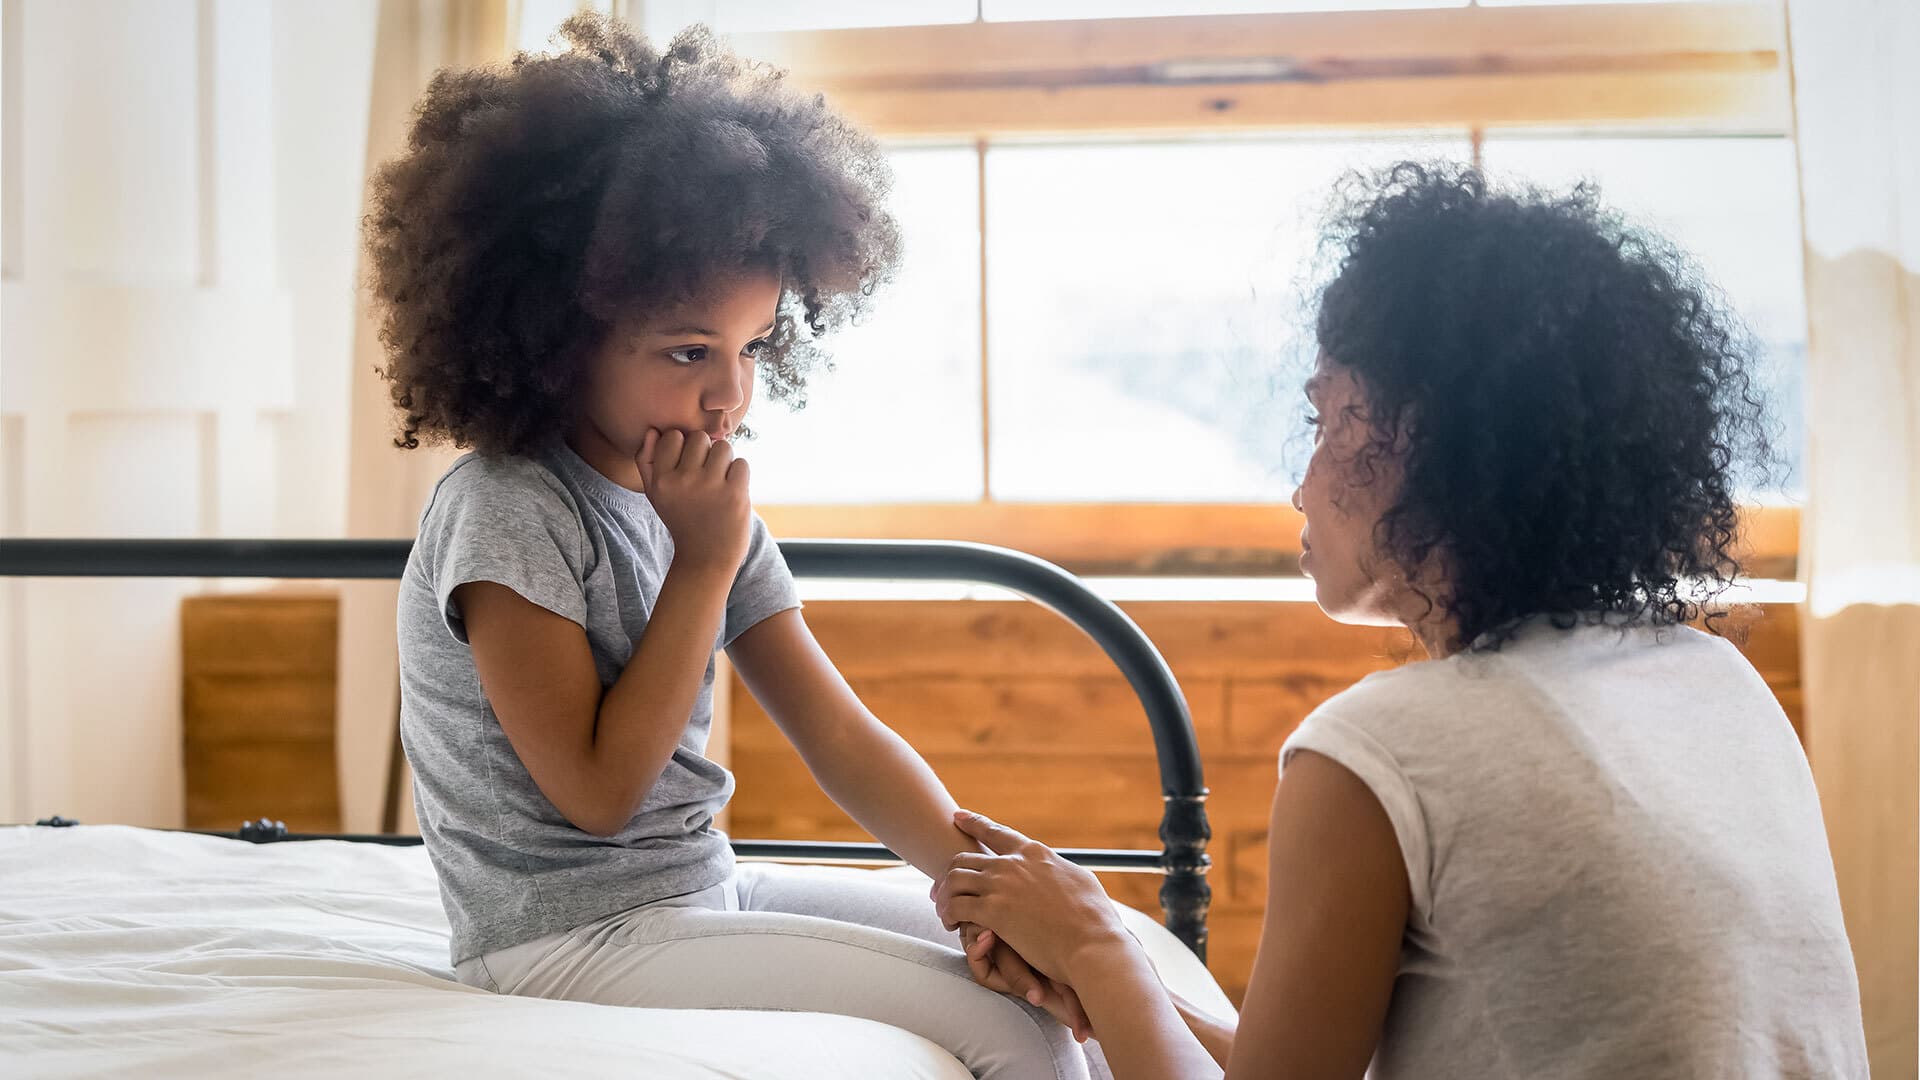 A mom helps daughter deal with stress. UMD’s Department of Family Science in the School of Public Health is partnering with the Prince George’s County Health Department to provide families with guidelines on dealing with stress and handling changing family dynamics during the pandemic.